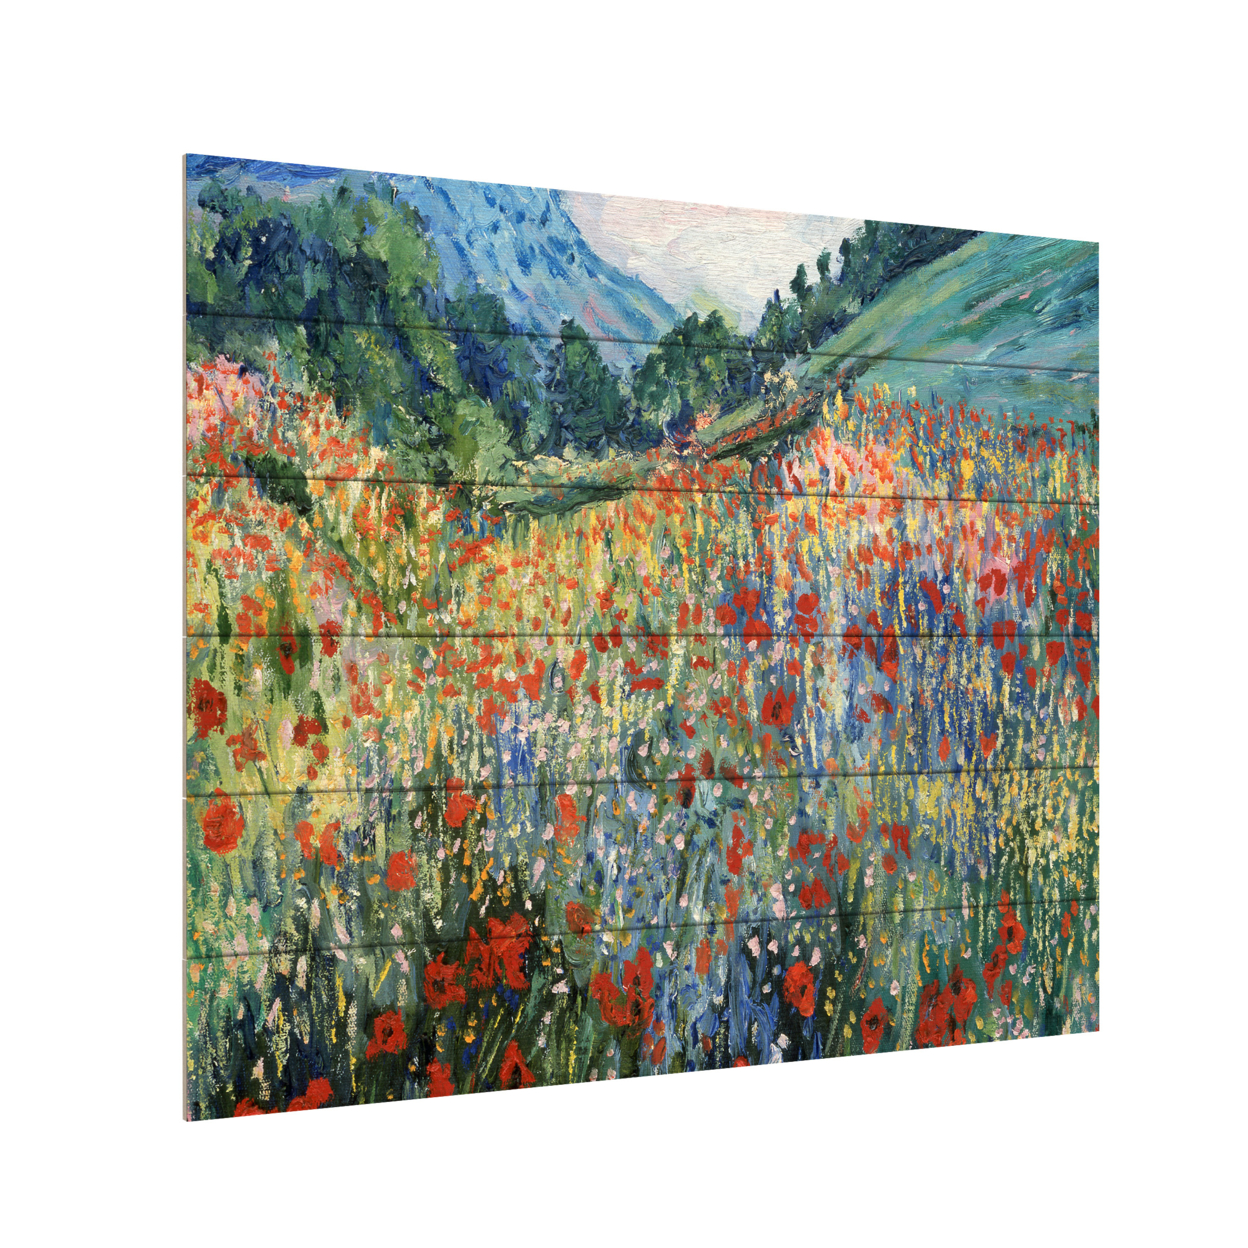 Wooden Slat Art 18 X 22 Inches Titled Field Of Wild Flowers Ready To Hang Home Decor Picture